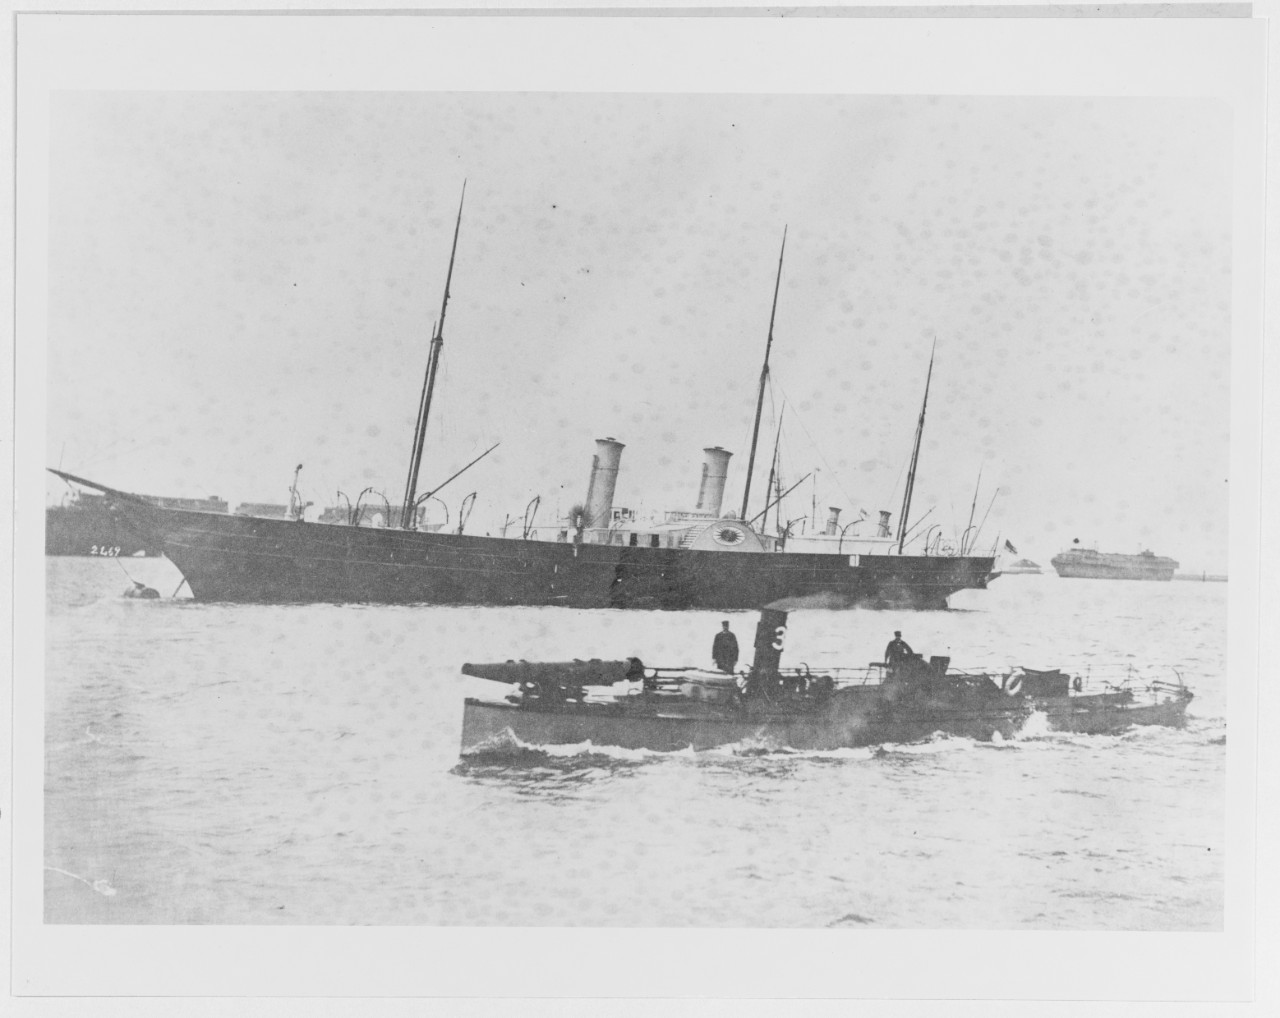 No. 3 (British first class torpedo boat, 1878-1905) (foreground) and OSBORNE (Paddle Royal yacht, 1870-1908)